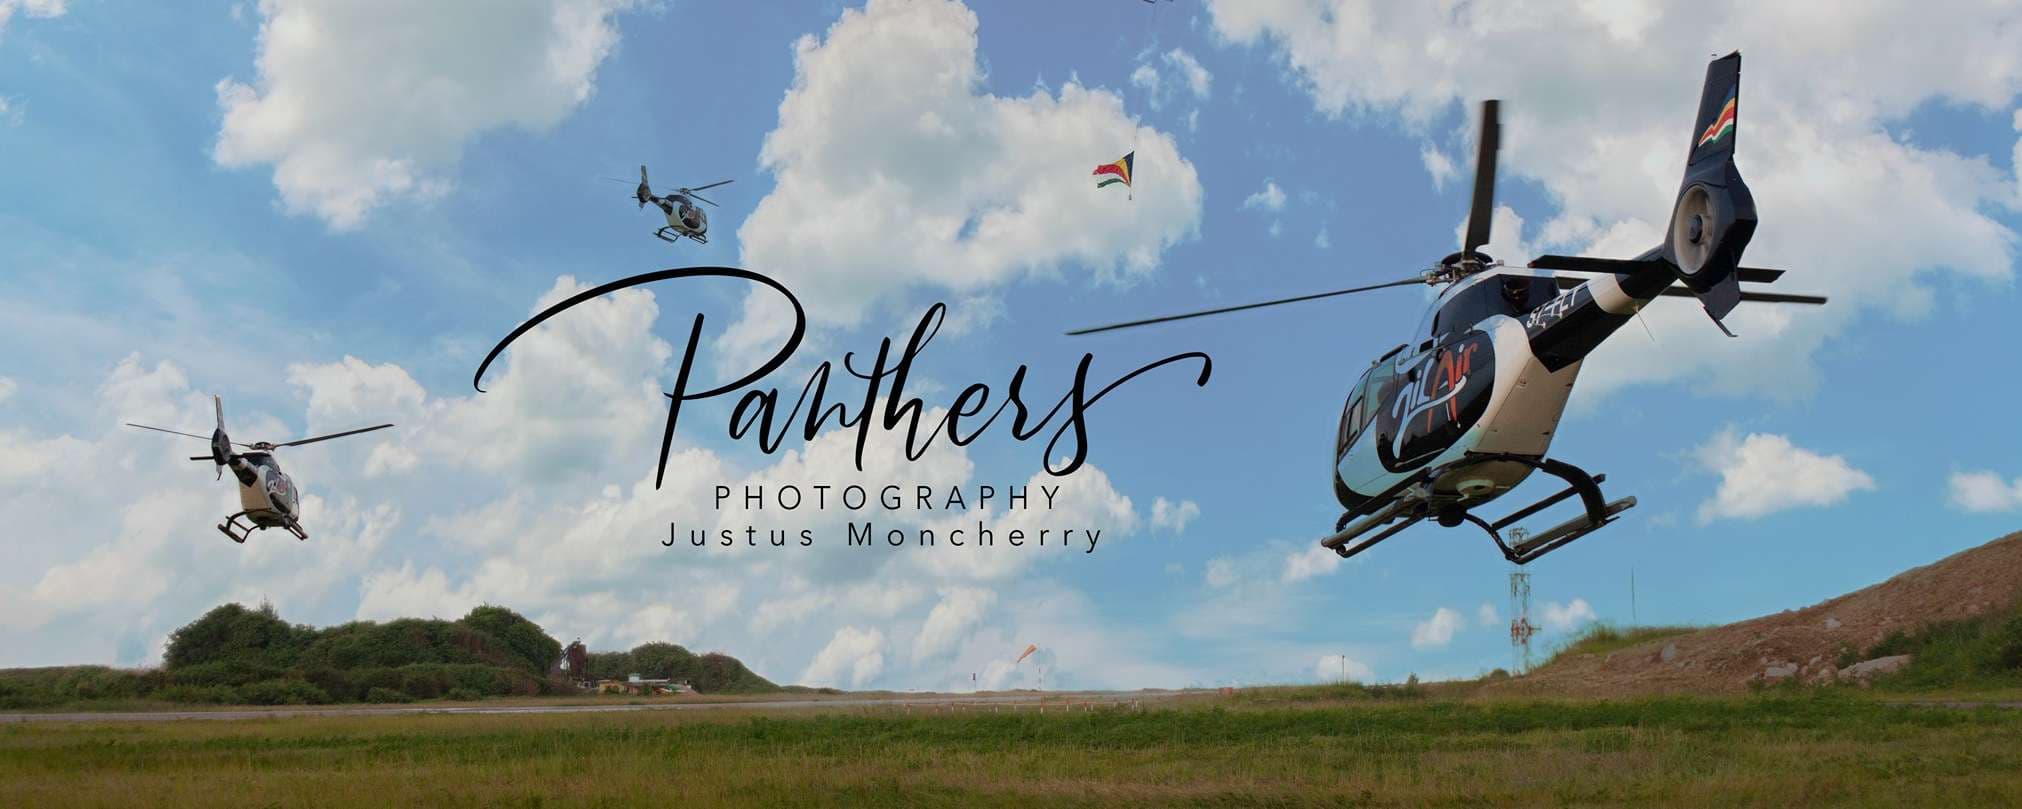 Panthers Photography